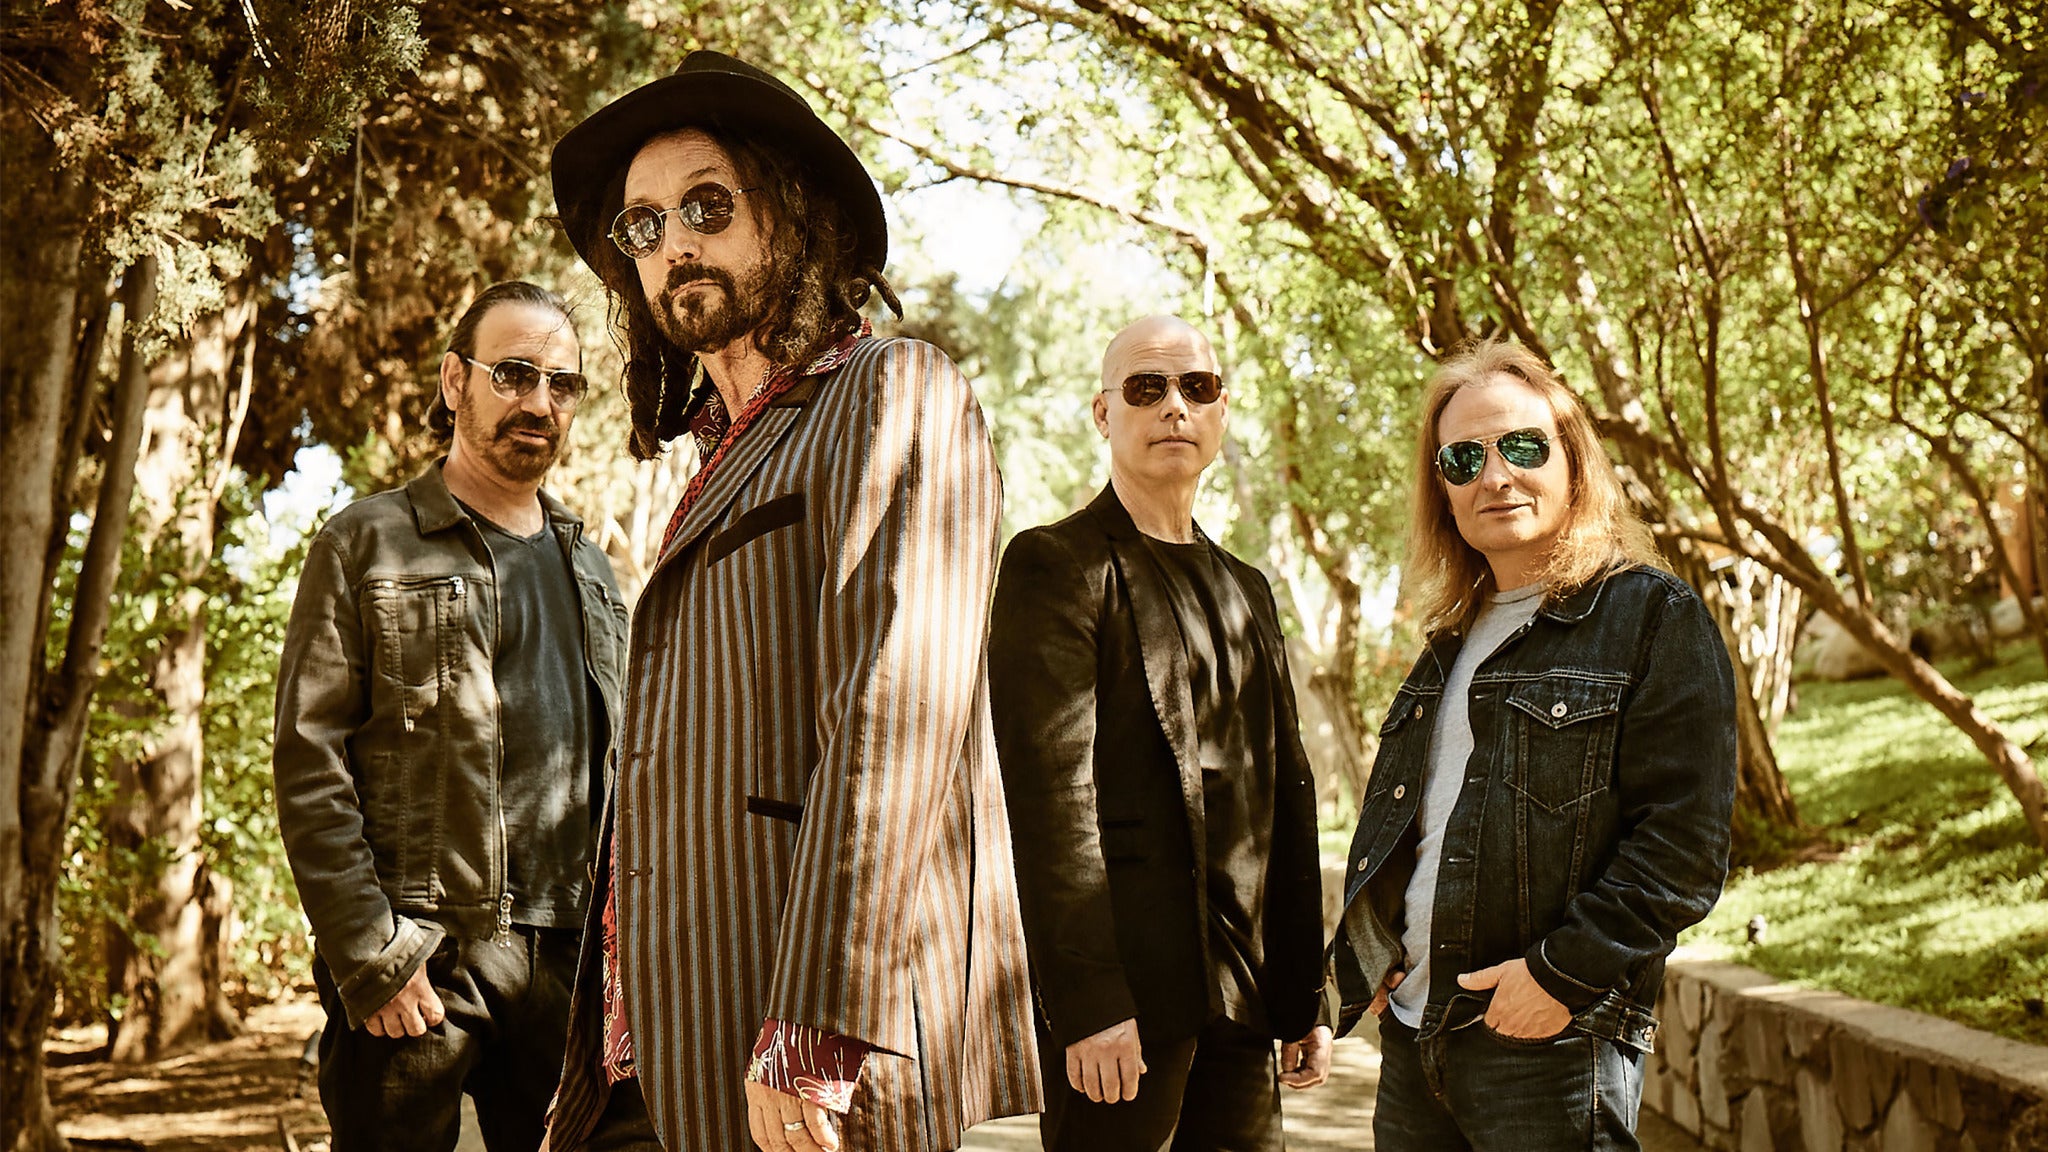 The Dirty Knobs With Mike Campbell in Boston promo photo for Artist presale offer code